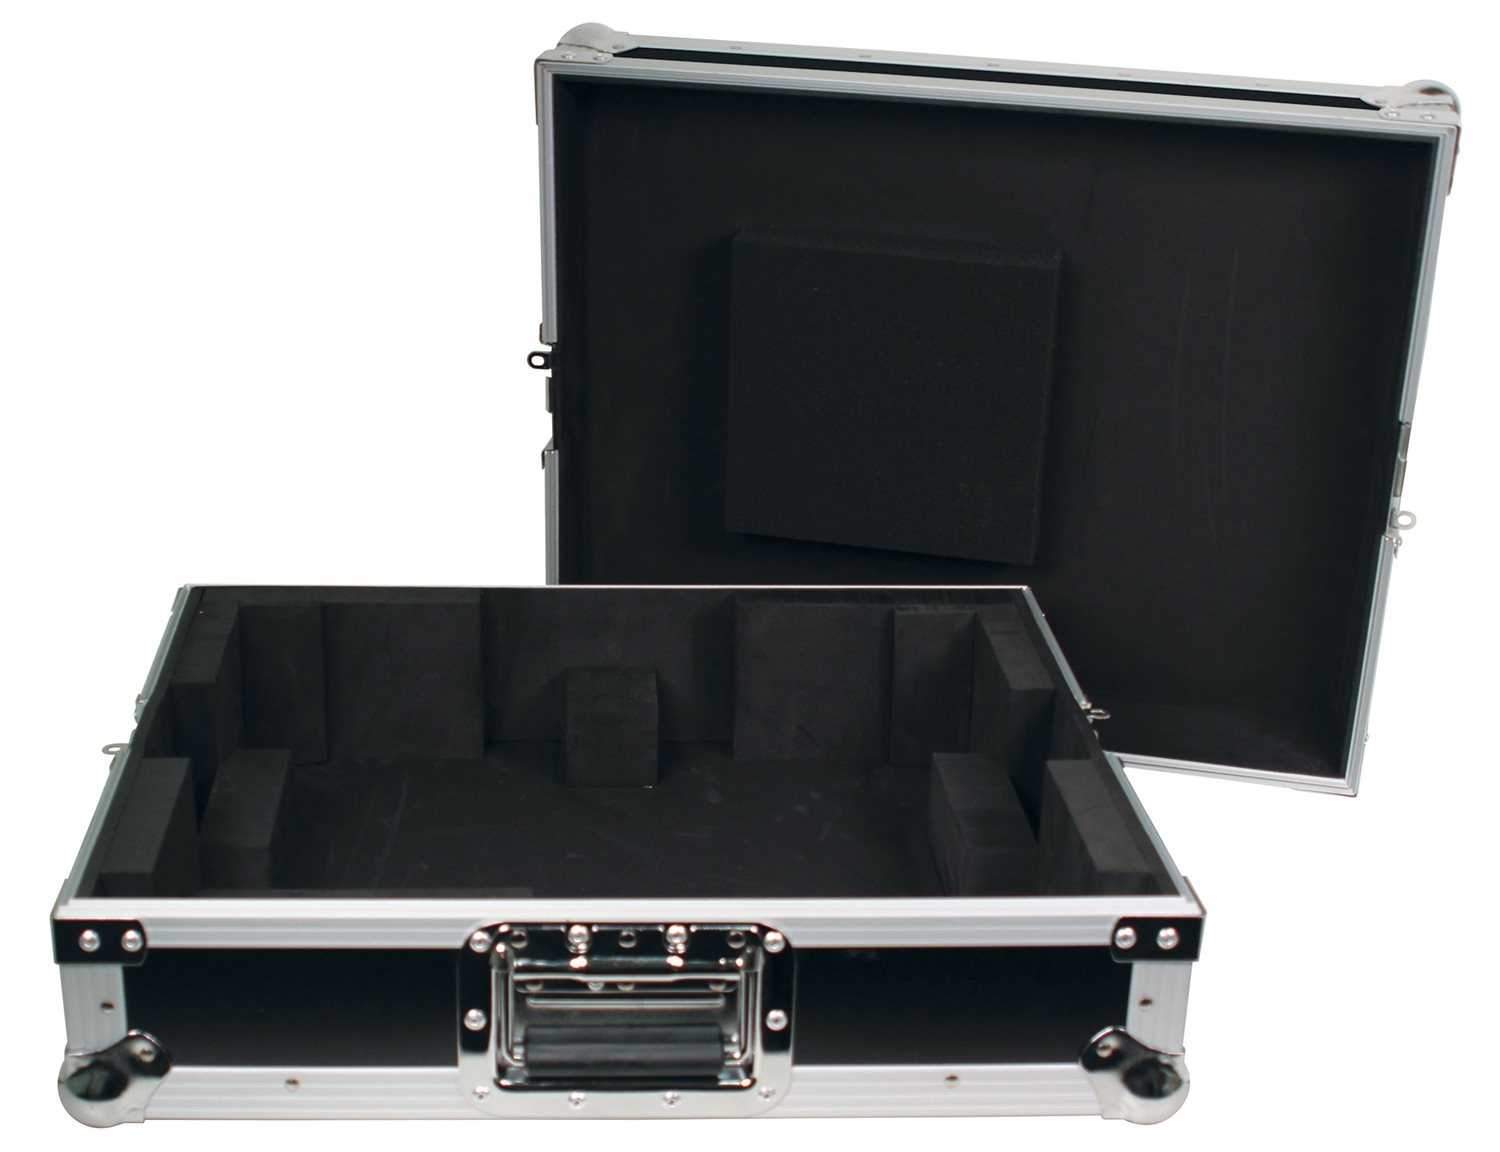 Stanton T.92 M2 USB Turntable with Road Case - ProSound and Stage Lighting